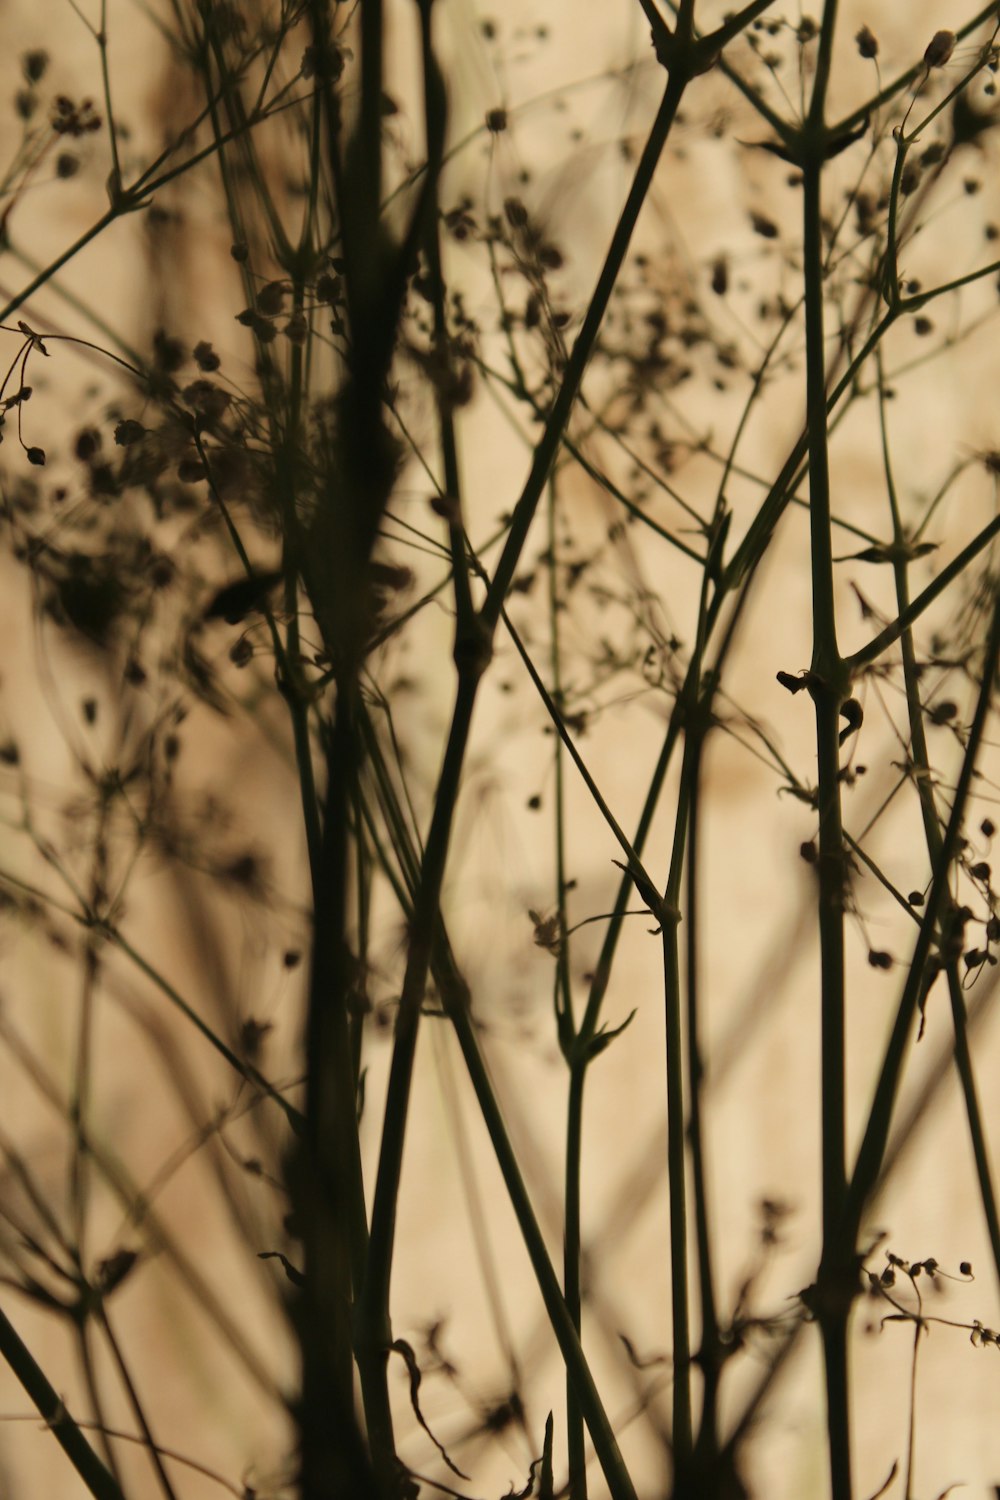 silhouette of plant stems